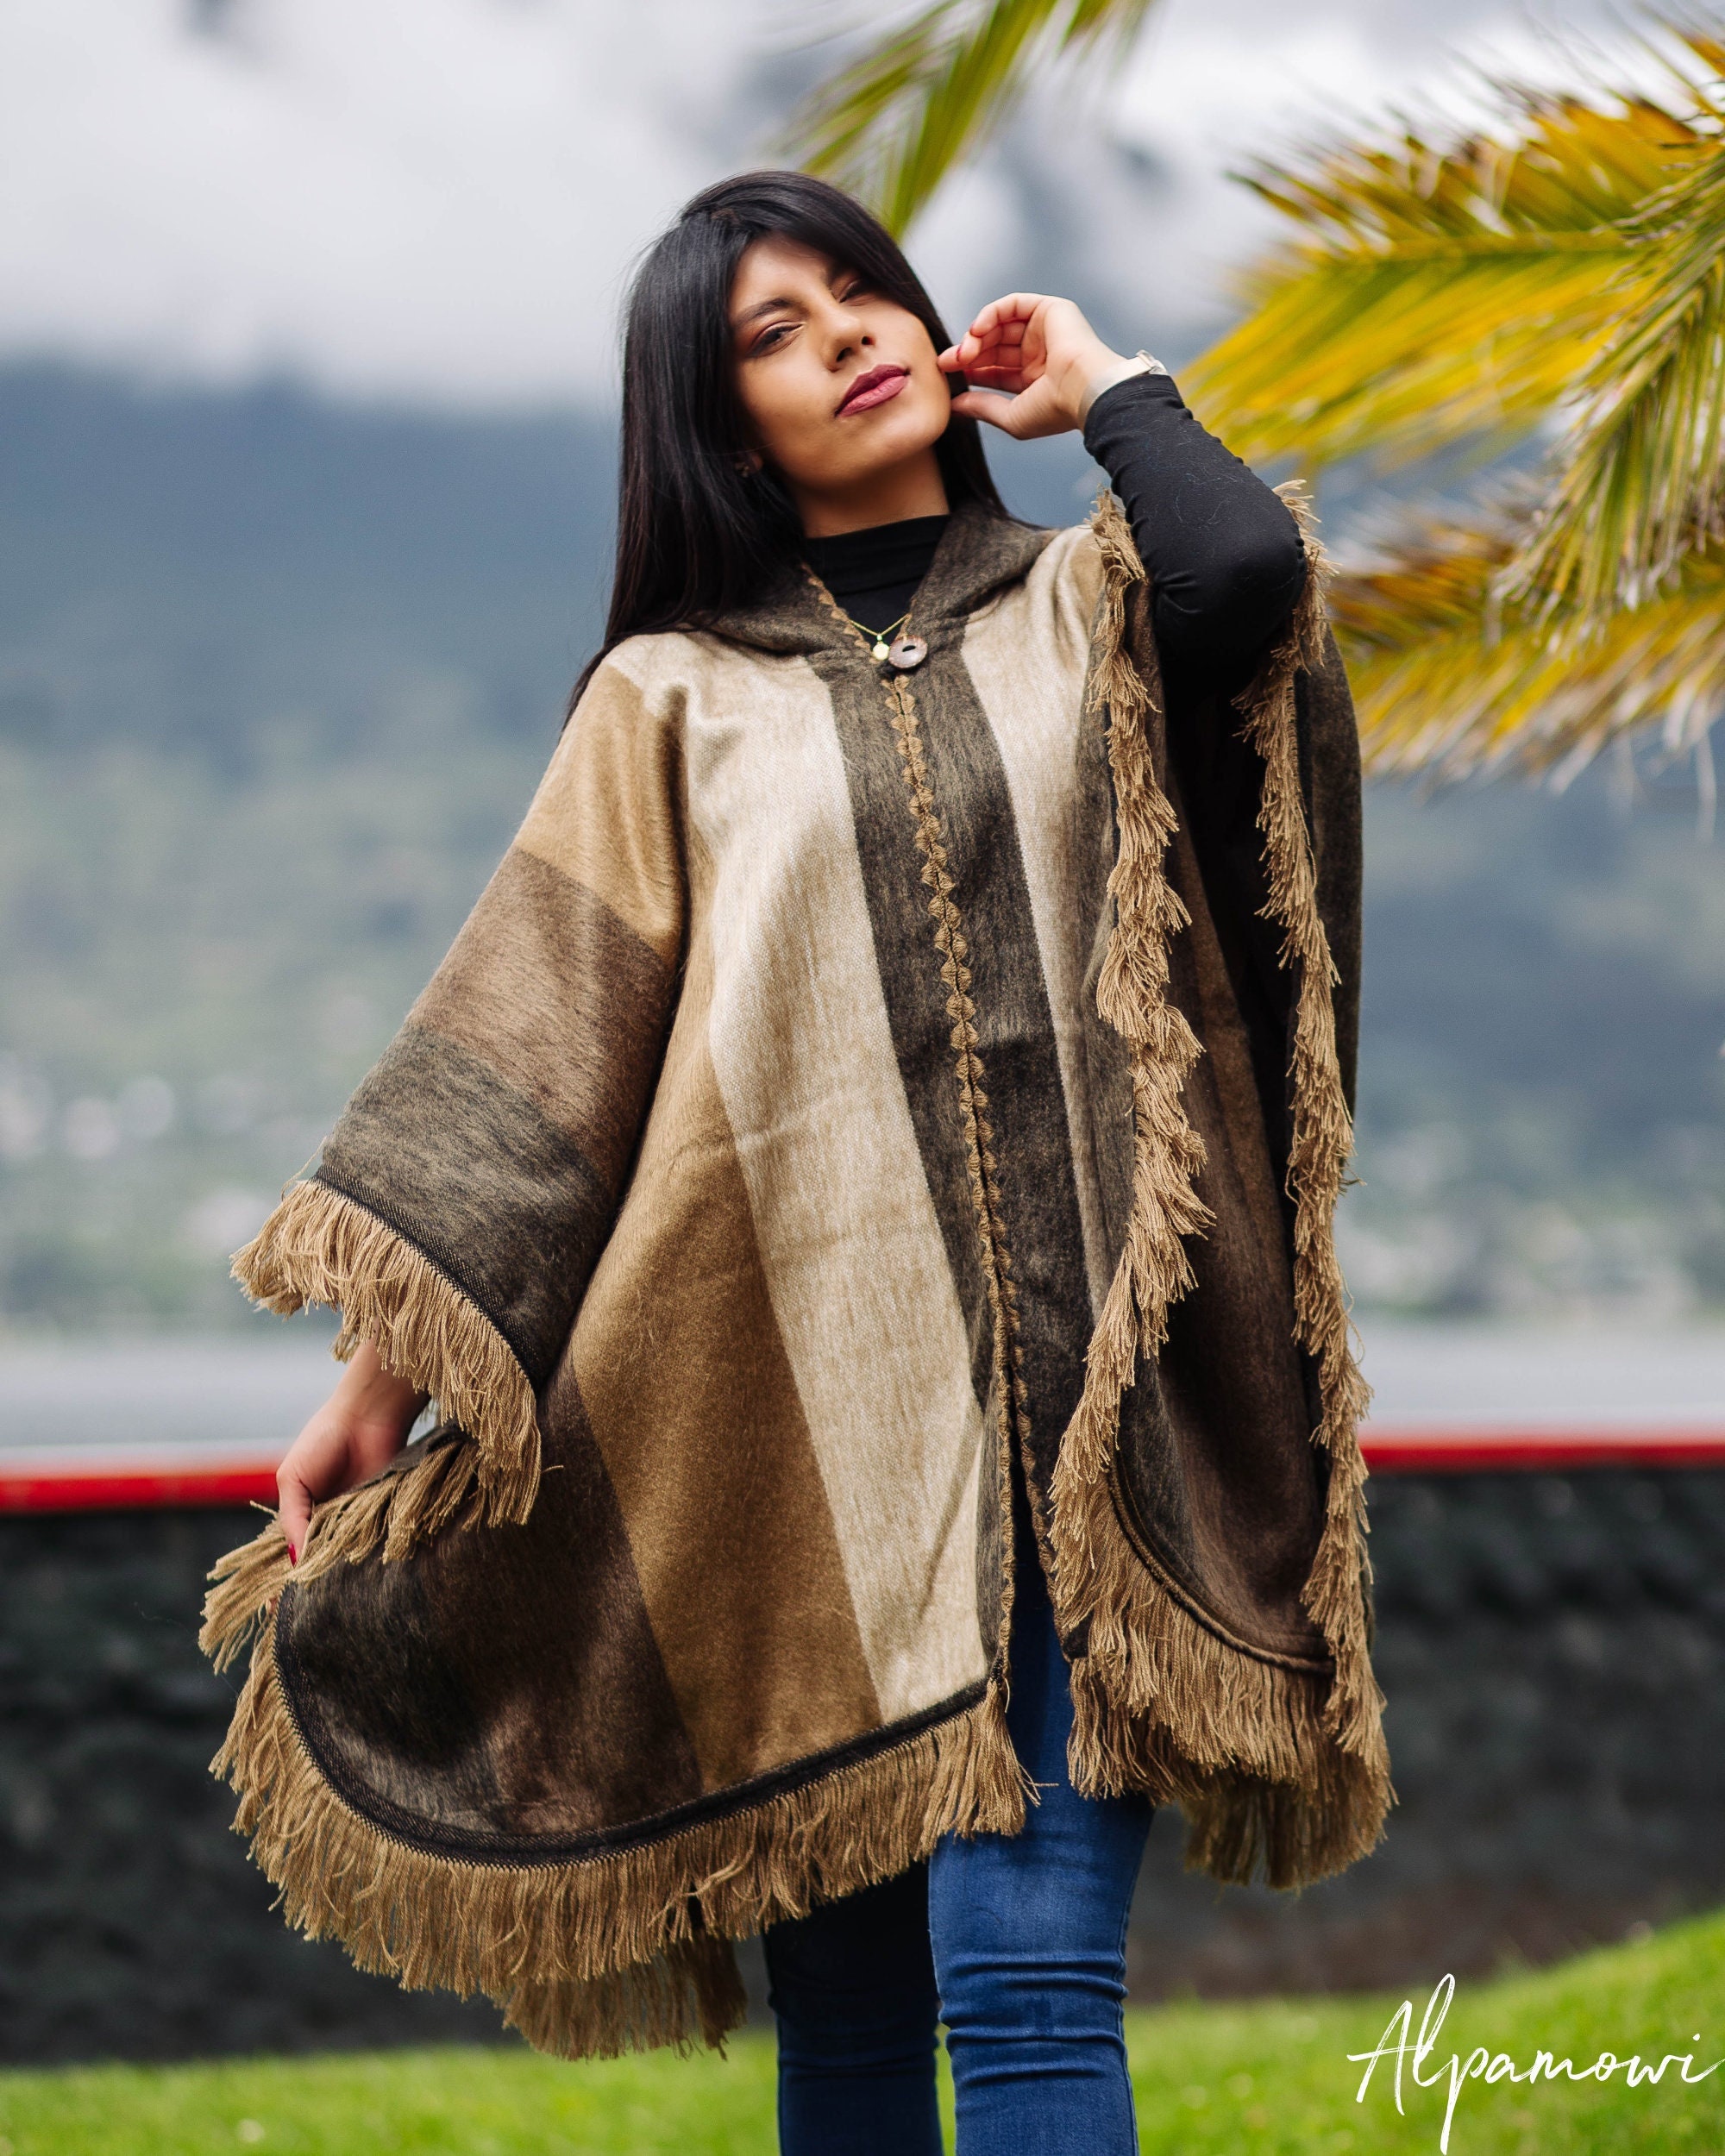 Quecci Sciarpa Donna Poncho Capes Golden Mandala Womens Long Large Shawl Wrap Oversized Winter/Fall Warm Blanket Scarf Unisex 68-196cm 